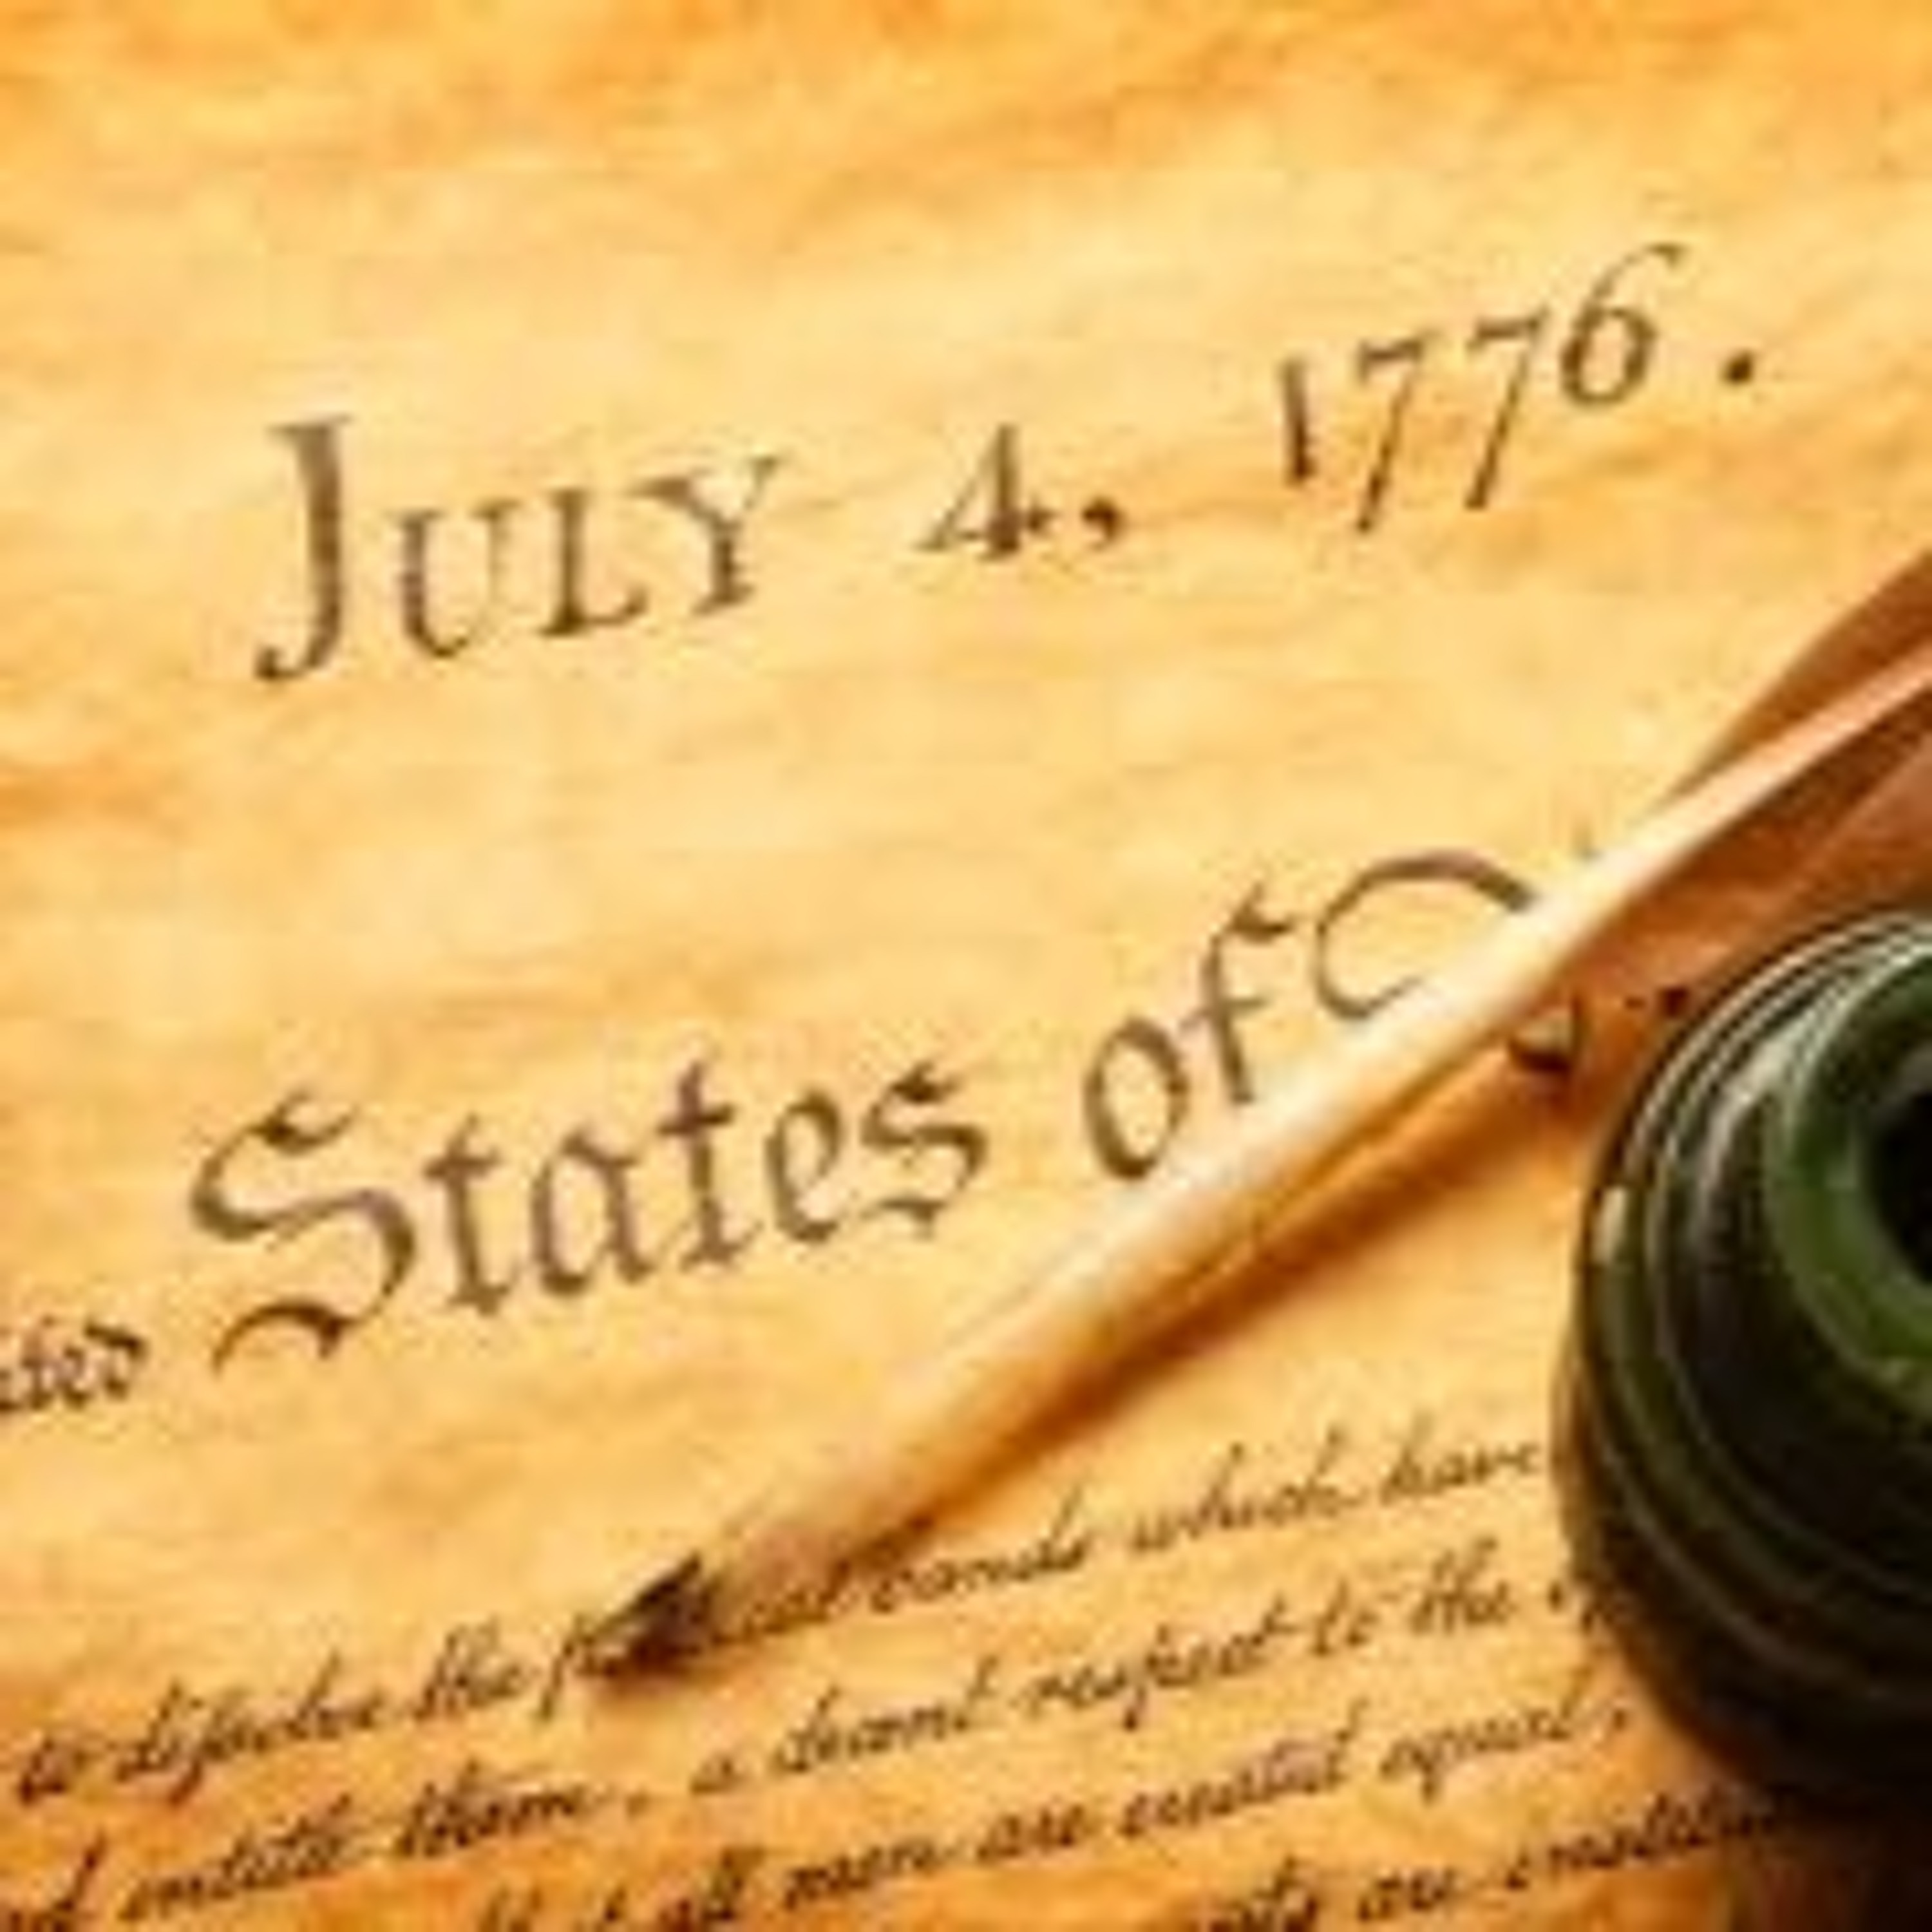 ArmsRoomRadio 07.07.18 Declaration of Independence and Facebook